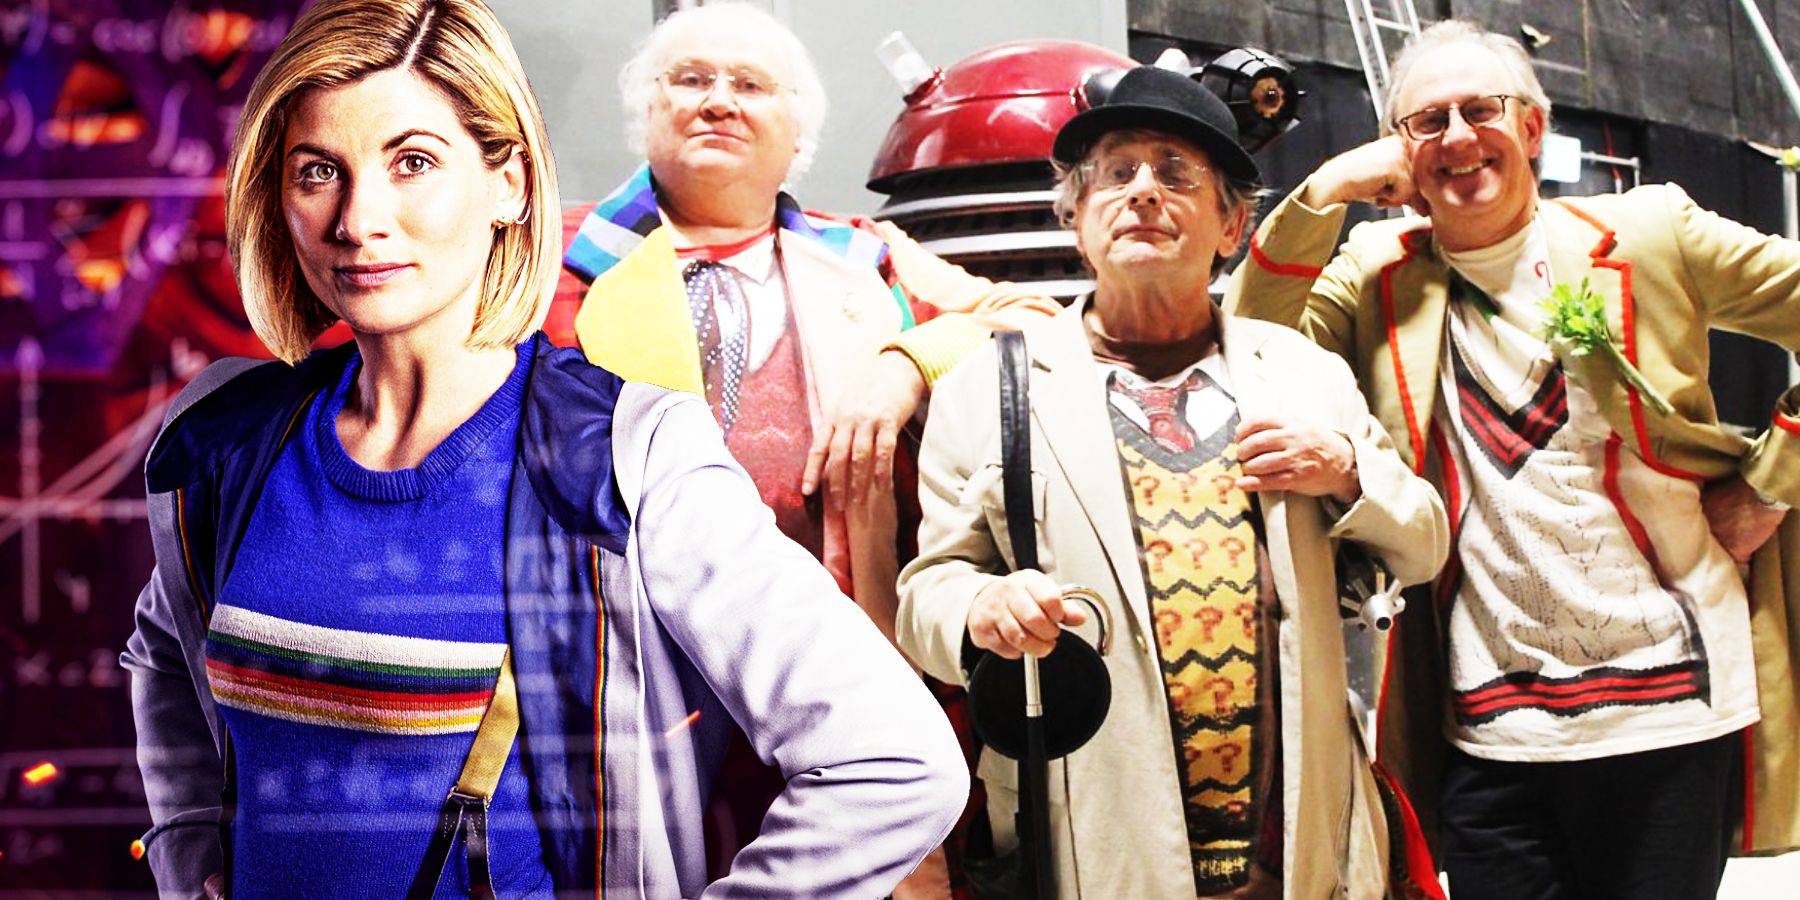 Jodie Whittaker as the Thirteenth Doctor alongside Colin Baker, Sylvester McCoy and Peter Davison who are rumored for the Centenary Special